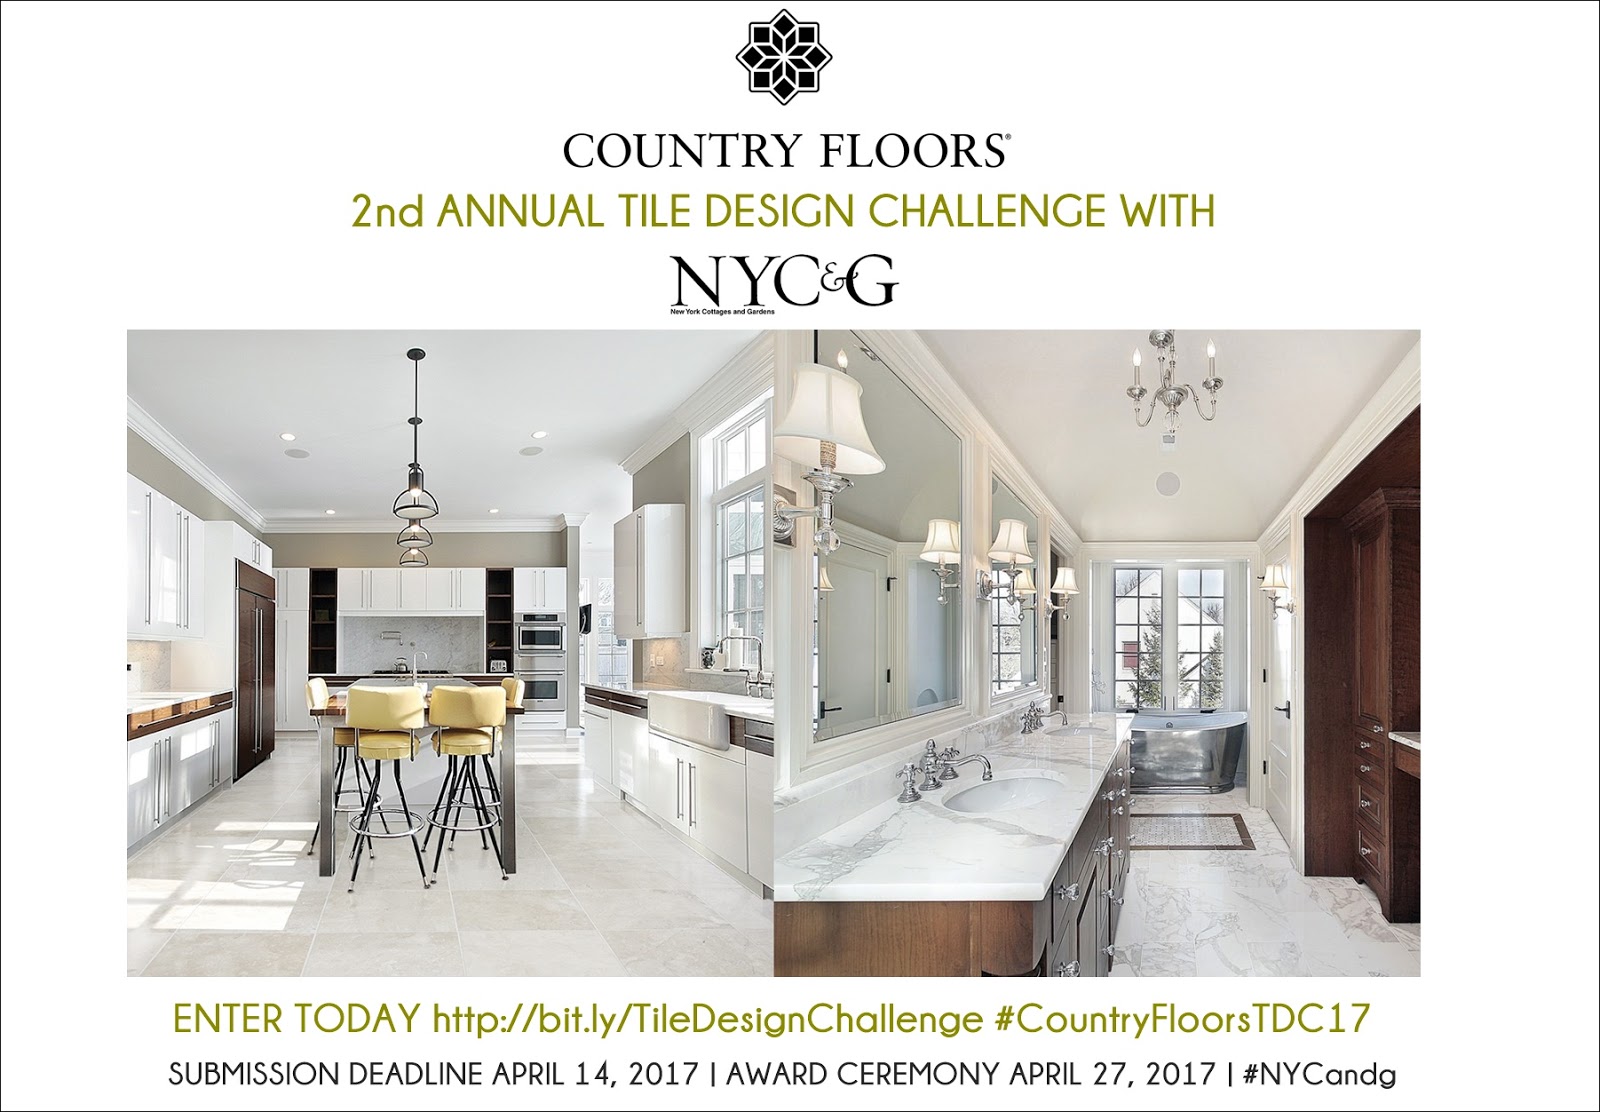 Country Floors 2nd Annual Tile Design Challenge